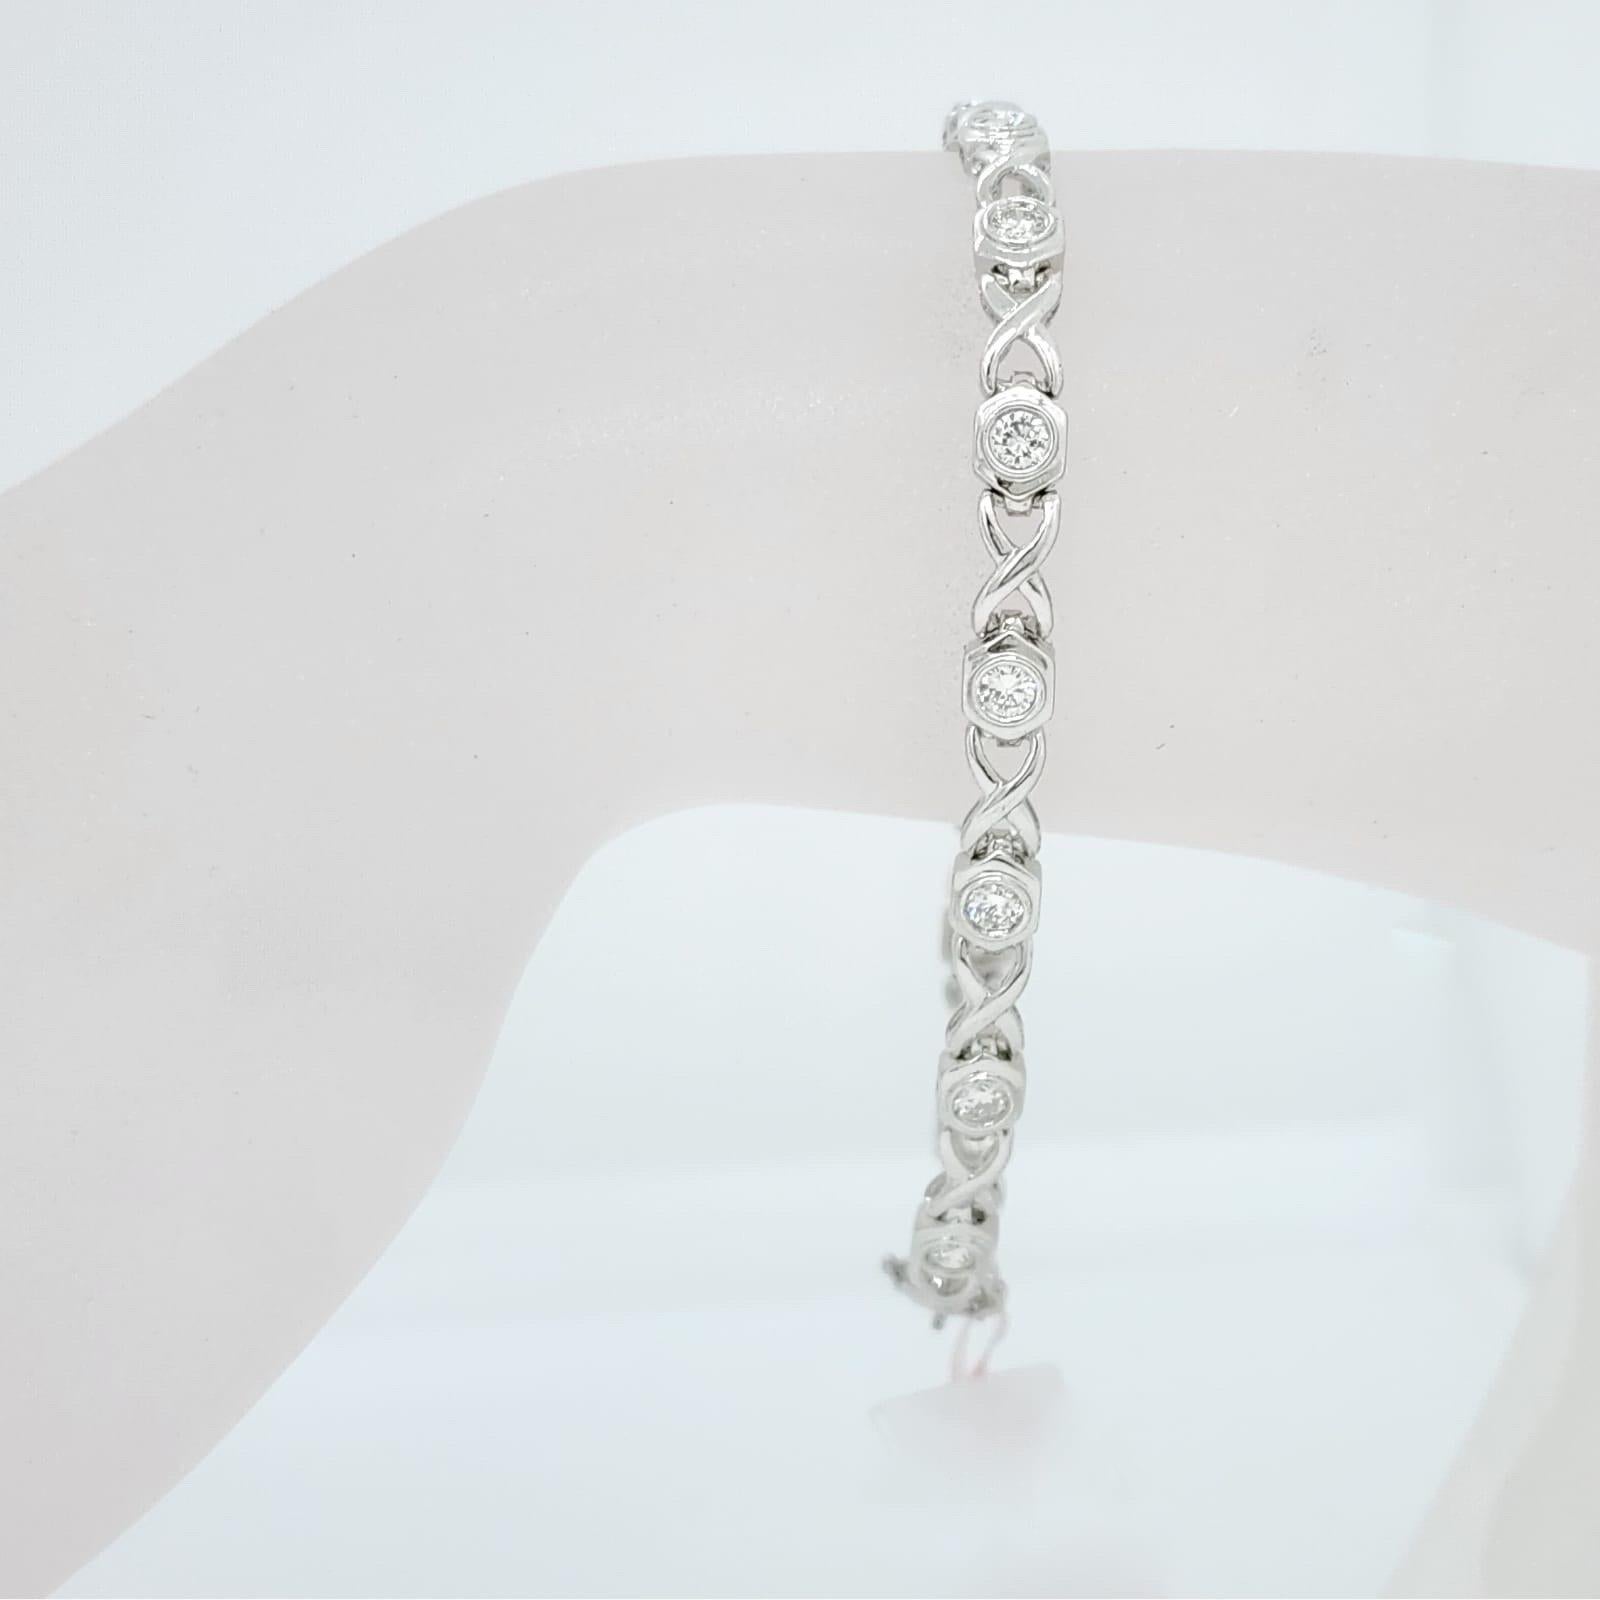 Beautiful white gold infinity link bracelet with 1.60 ct. good quality white diamond rounds.  Handmade in 18k white gold.  Length is 7.25